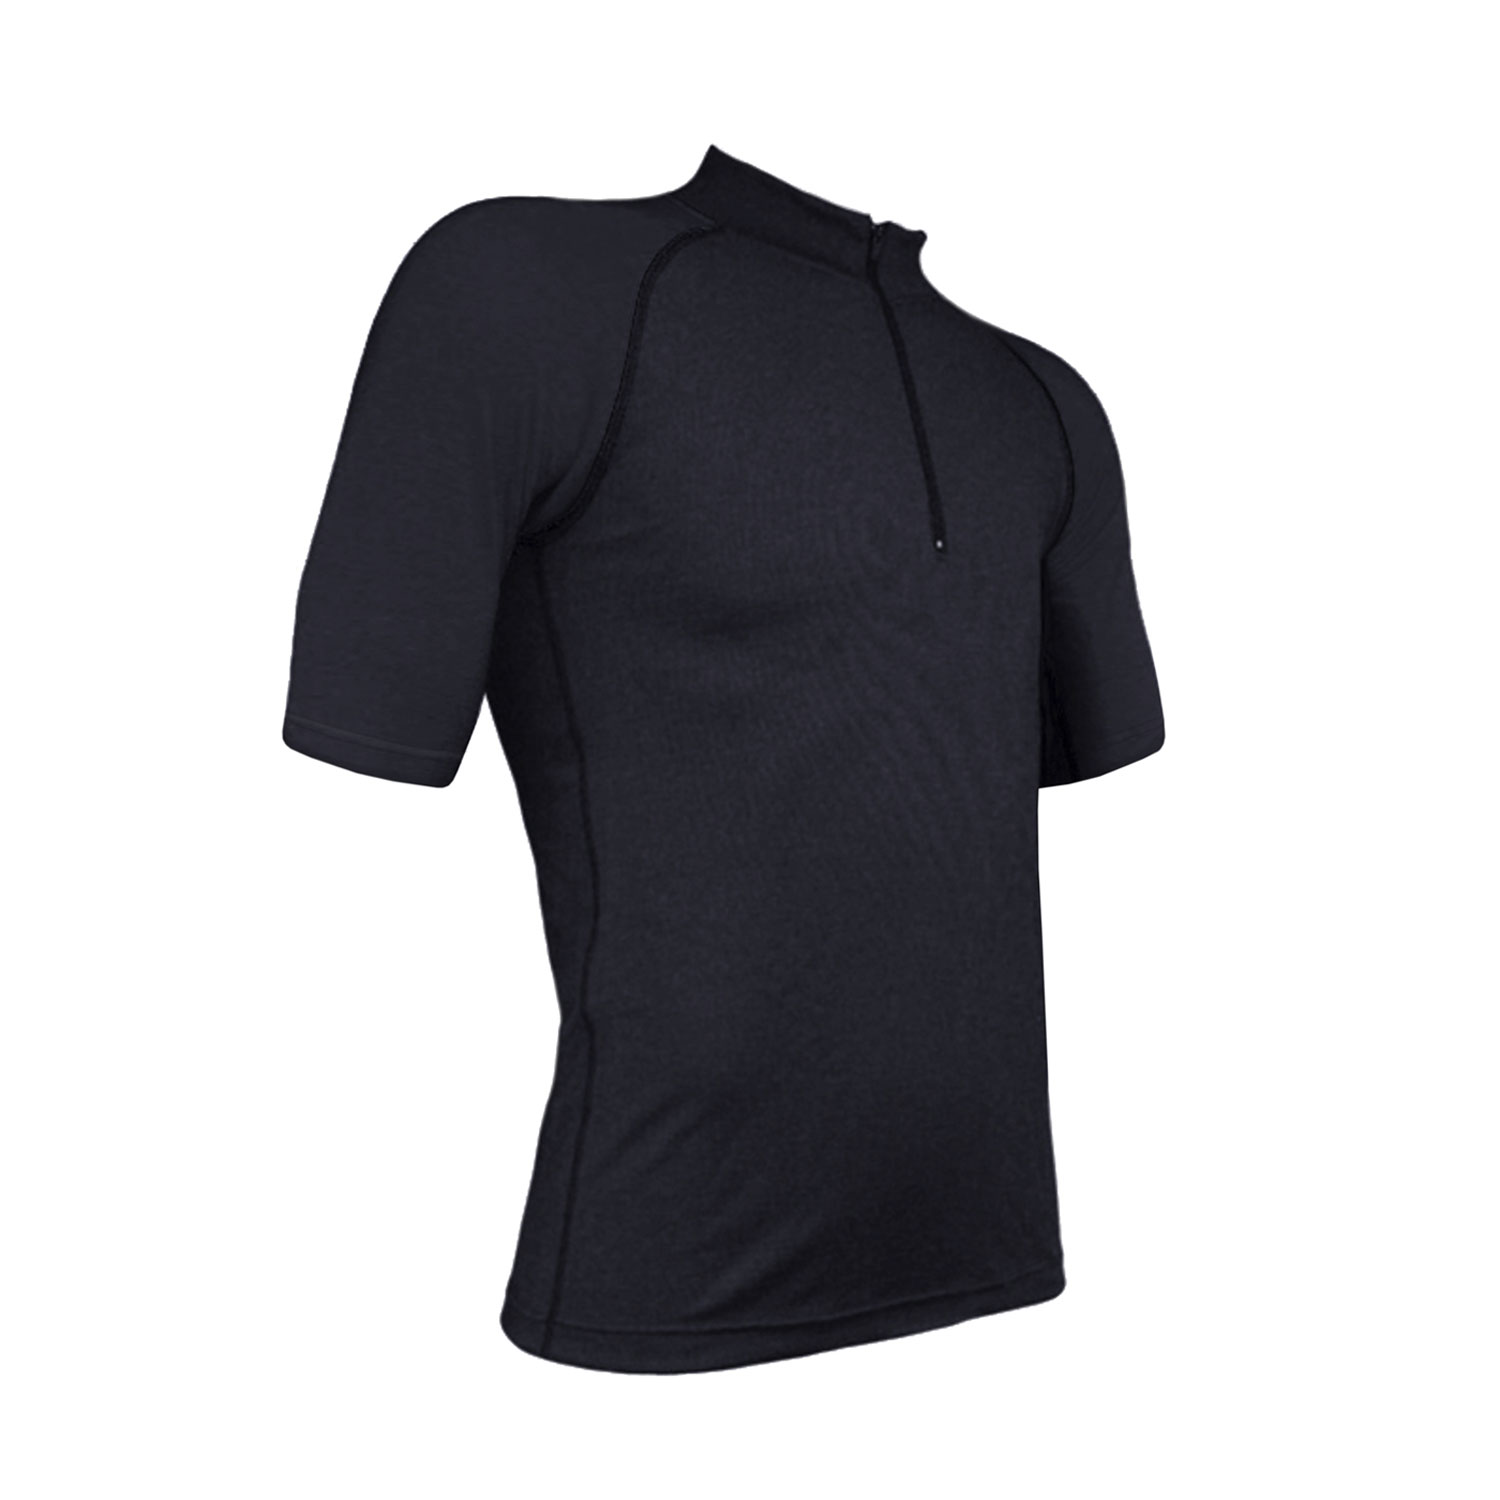 Review: Solo Merino short sleeve base layer